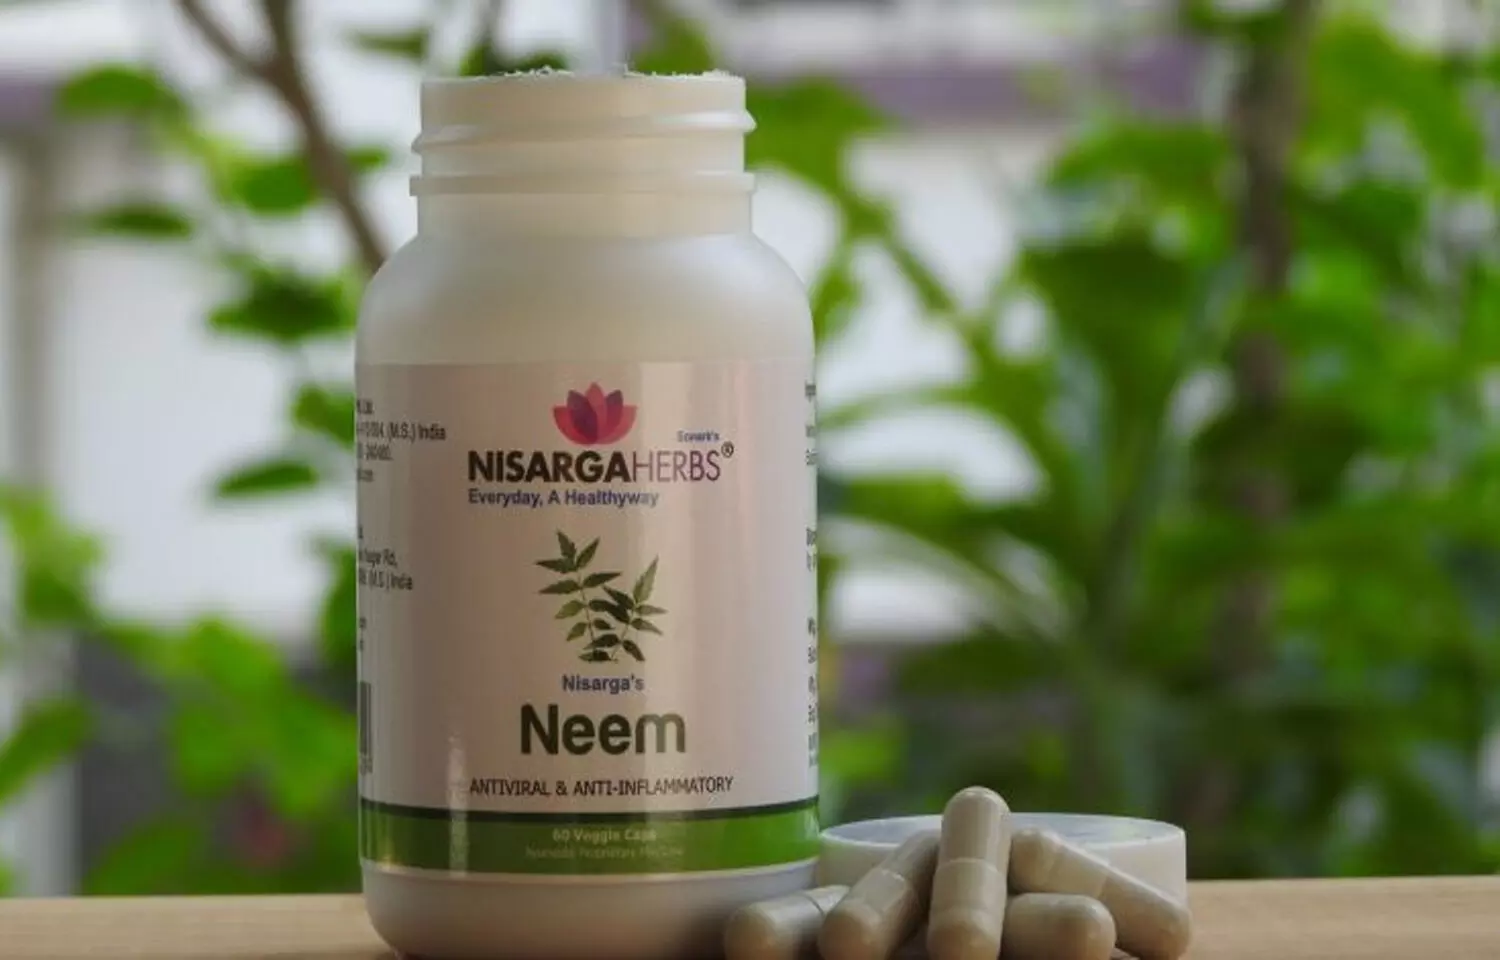 ESIC Hospital Faridabad double-blind study on Neem Capsules shows 55 percent efficacy in preventing COVID